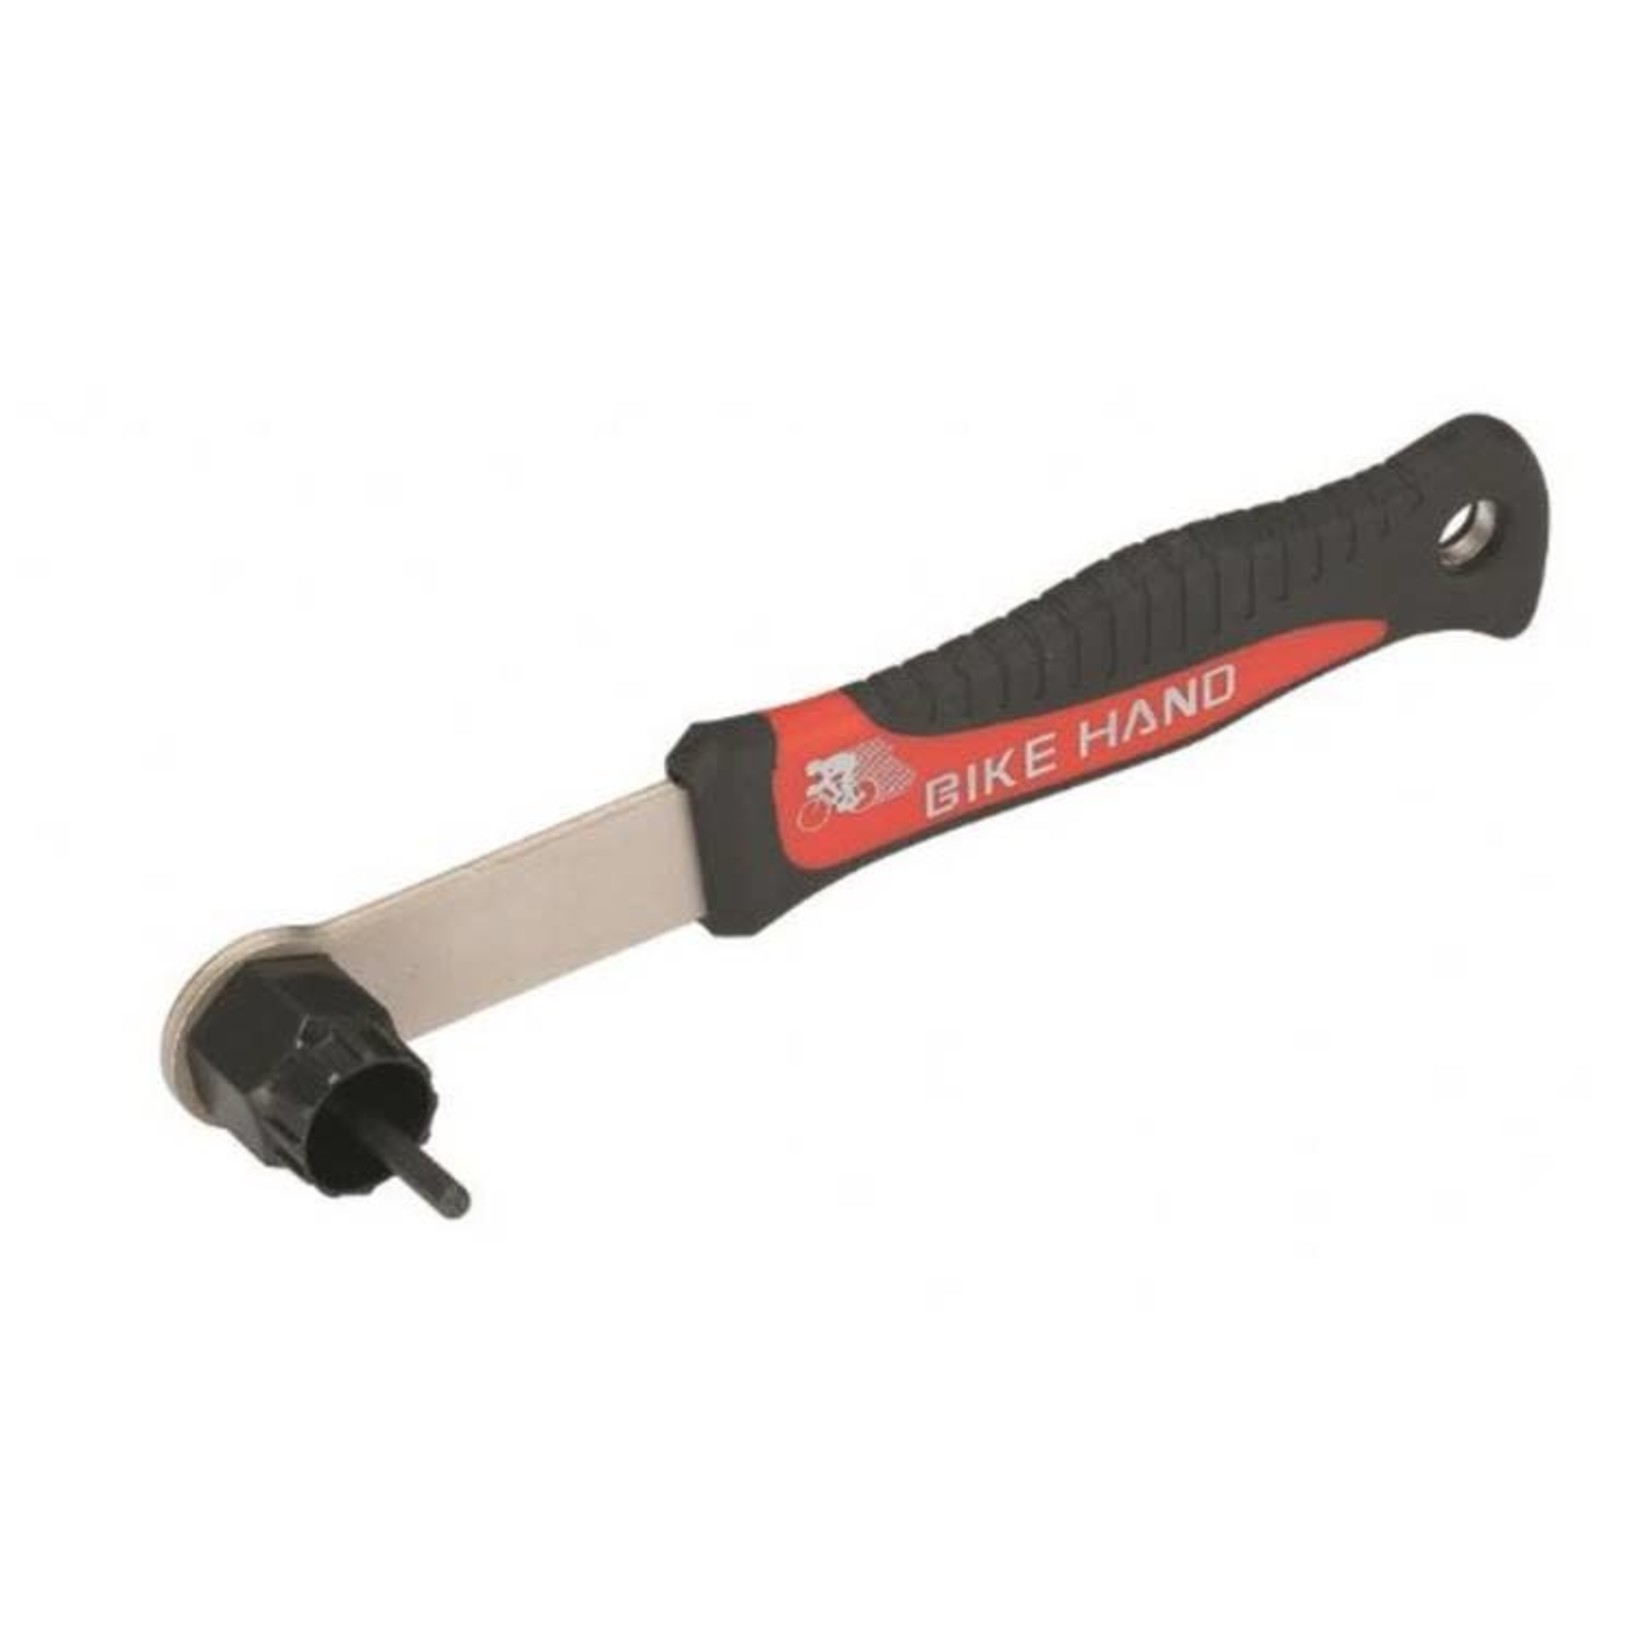 Bike Hand Cassette Remover with Handle